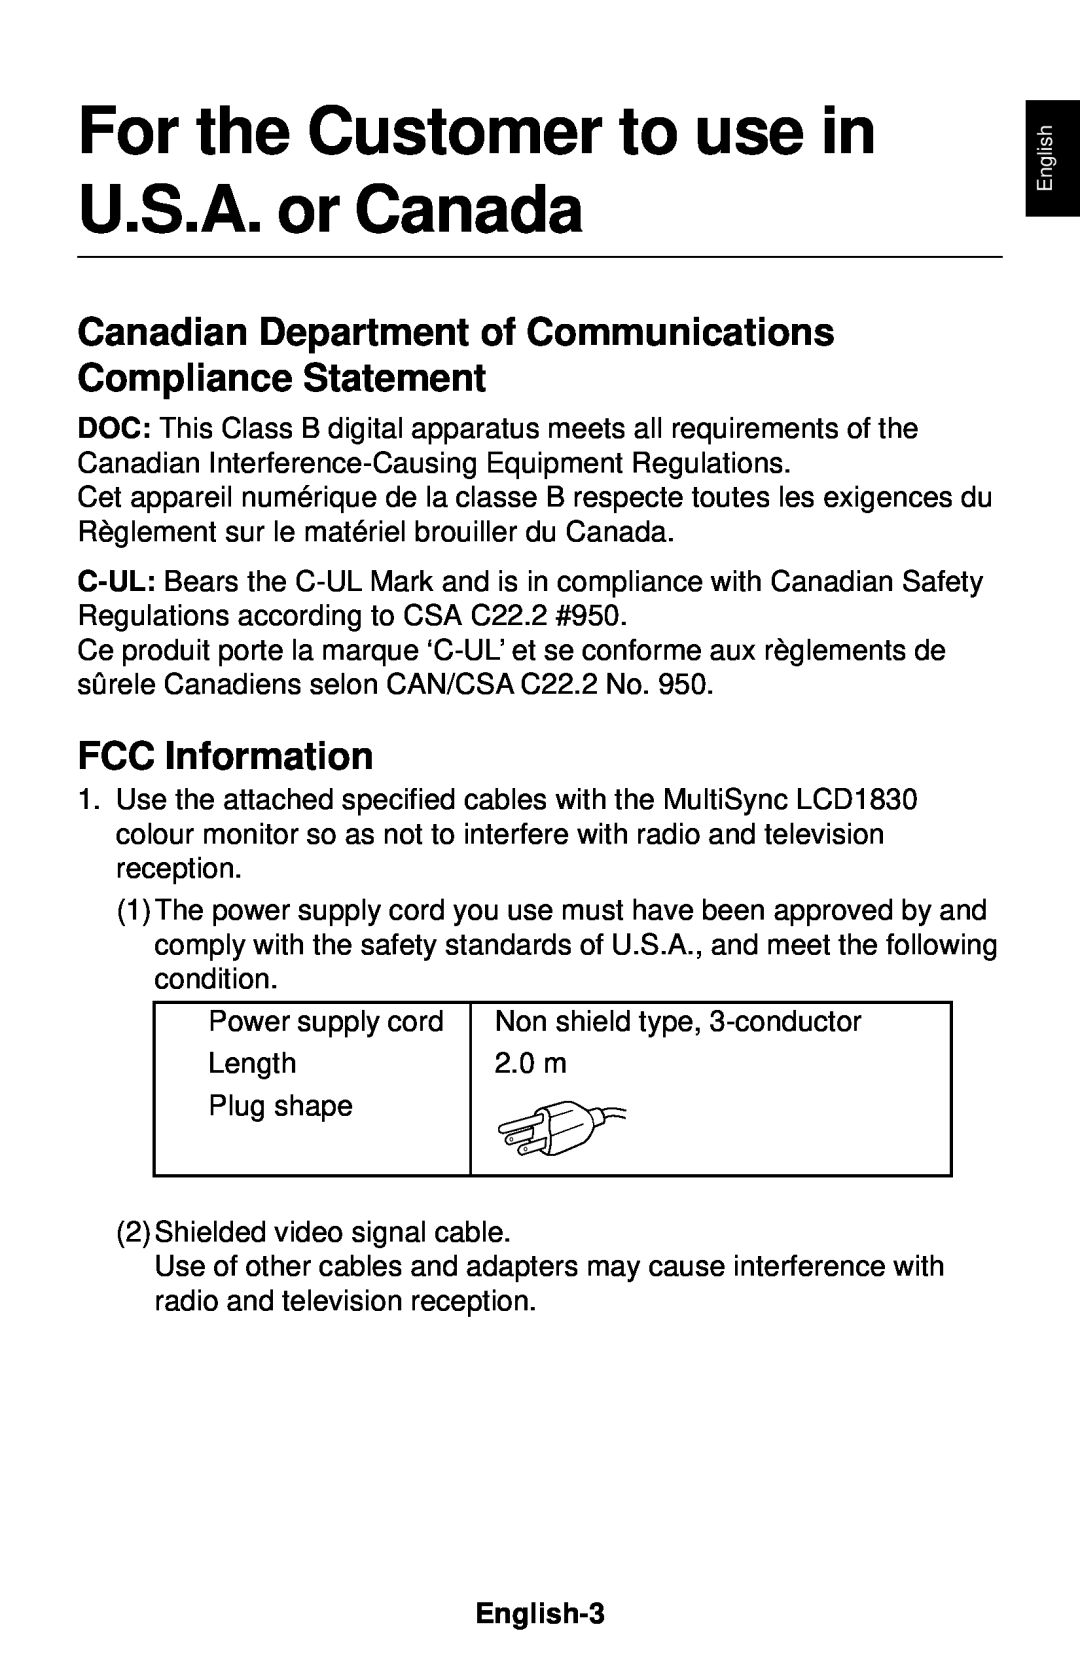 NEC LCD1830 For the Customer to use in U.S.A. or Canada, Canadian Department of Communications Compliance Statement 